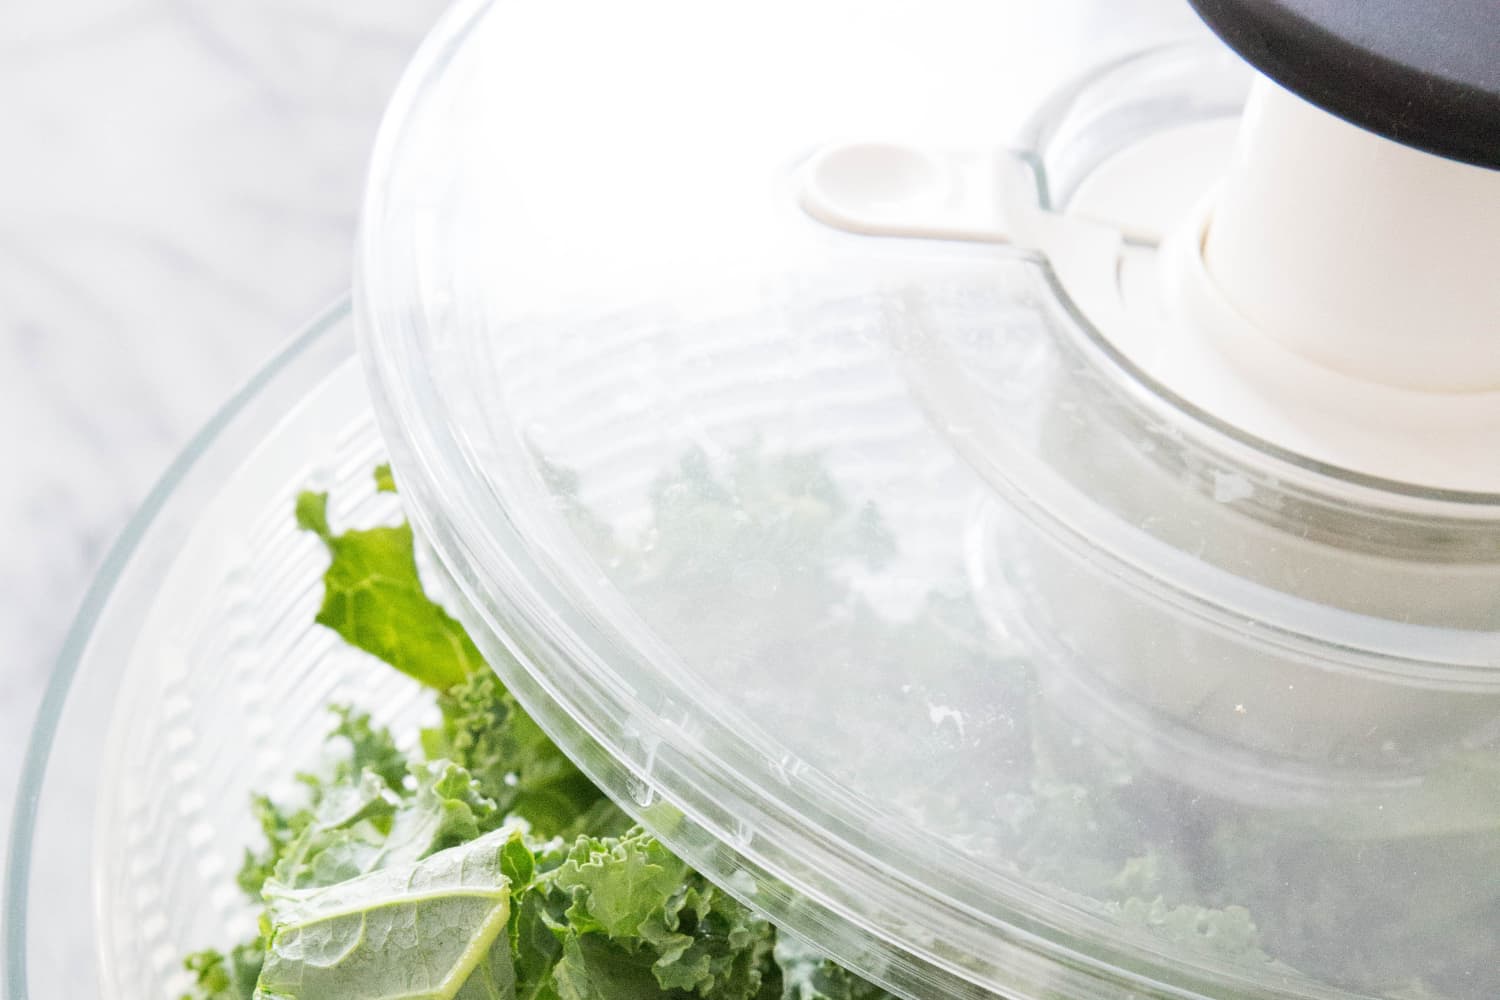 2021's Top Salad Spinner Picks for Your Kitchen